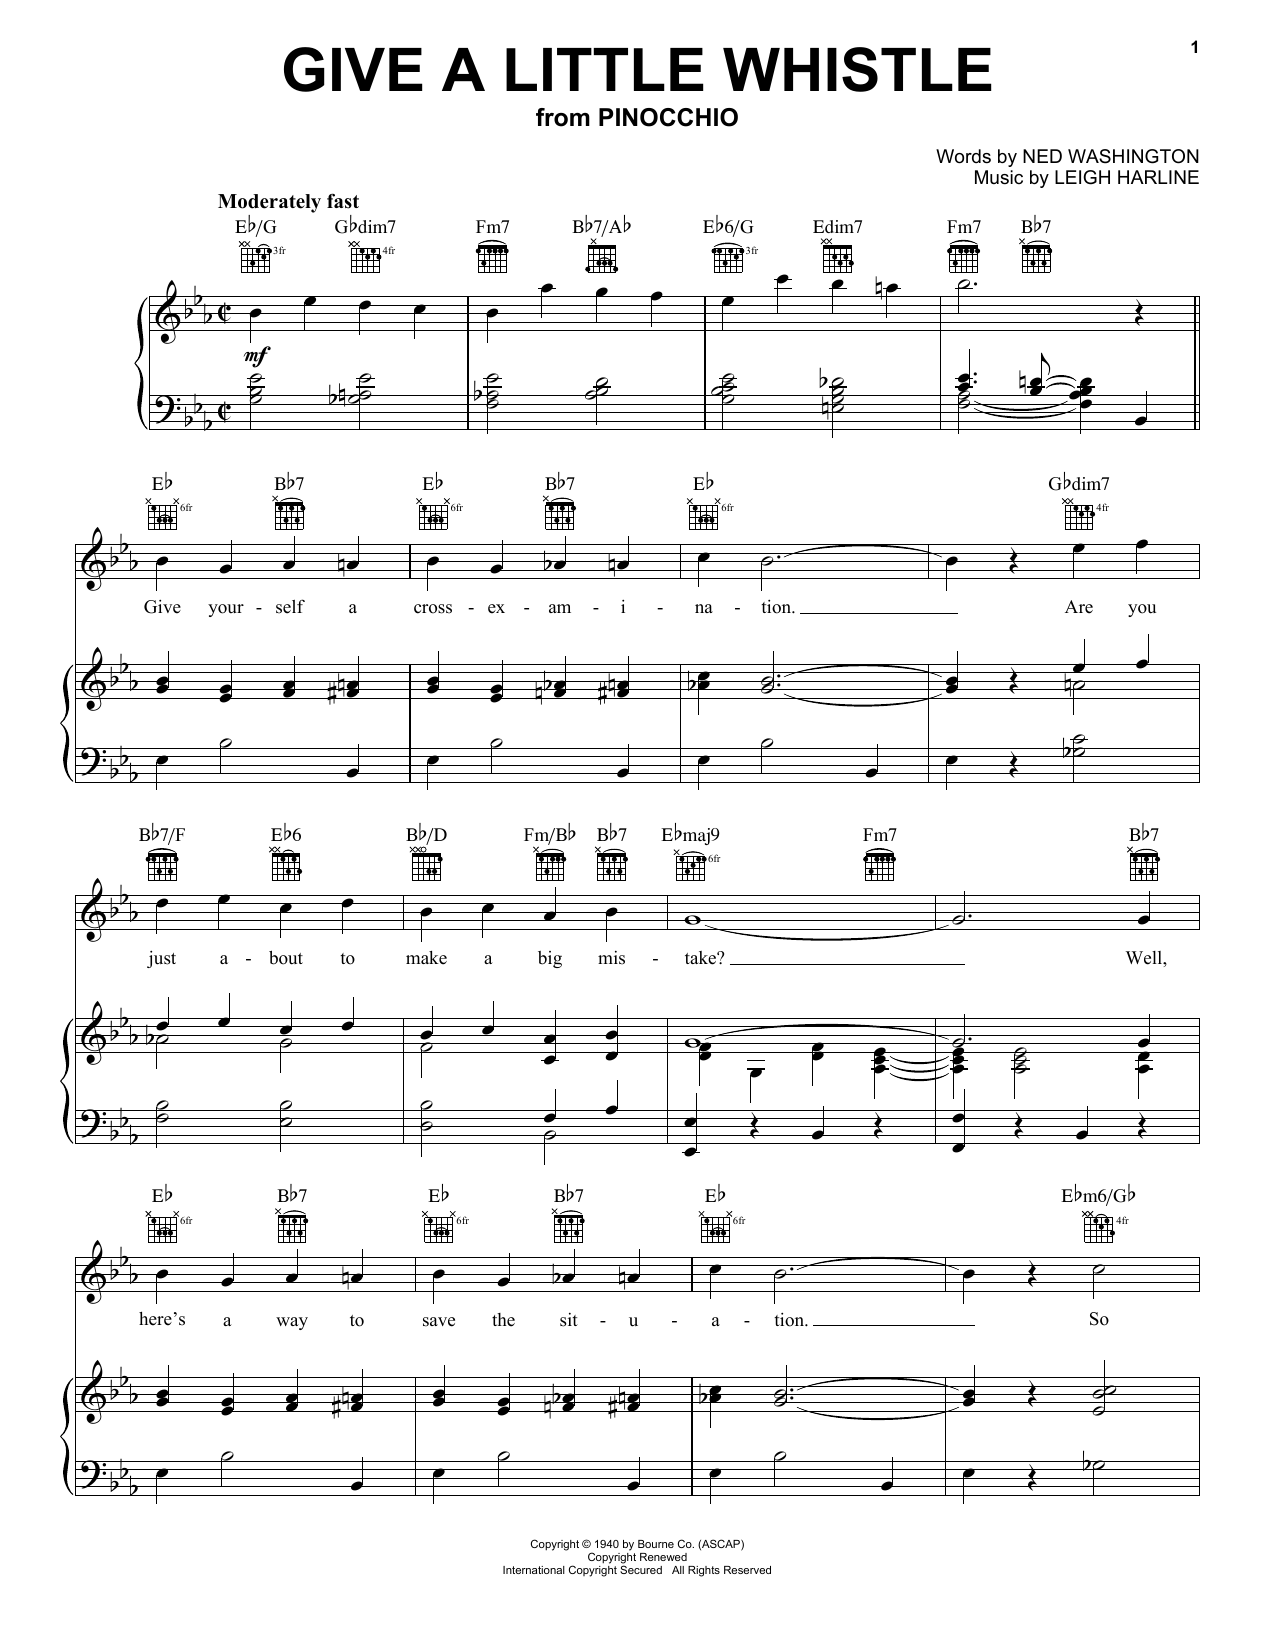 Download Ned Washington and Leigh Harline Give A Little Whistle (from Walt Disney Sheet Music